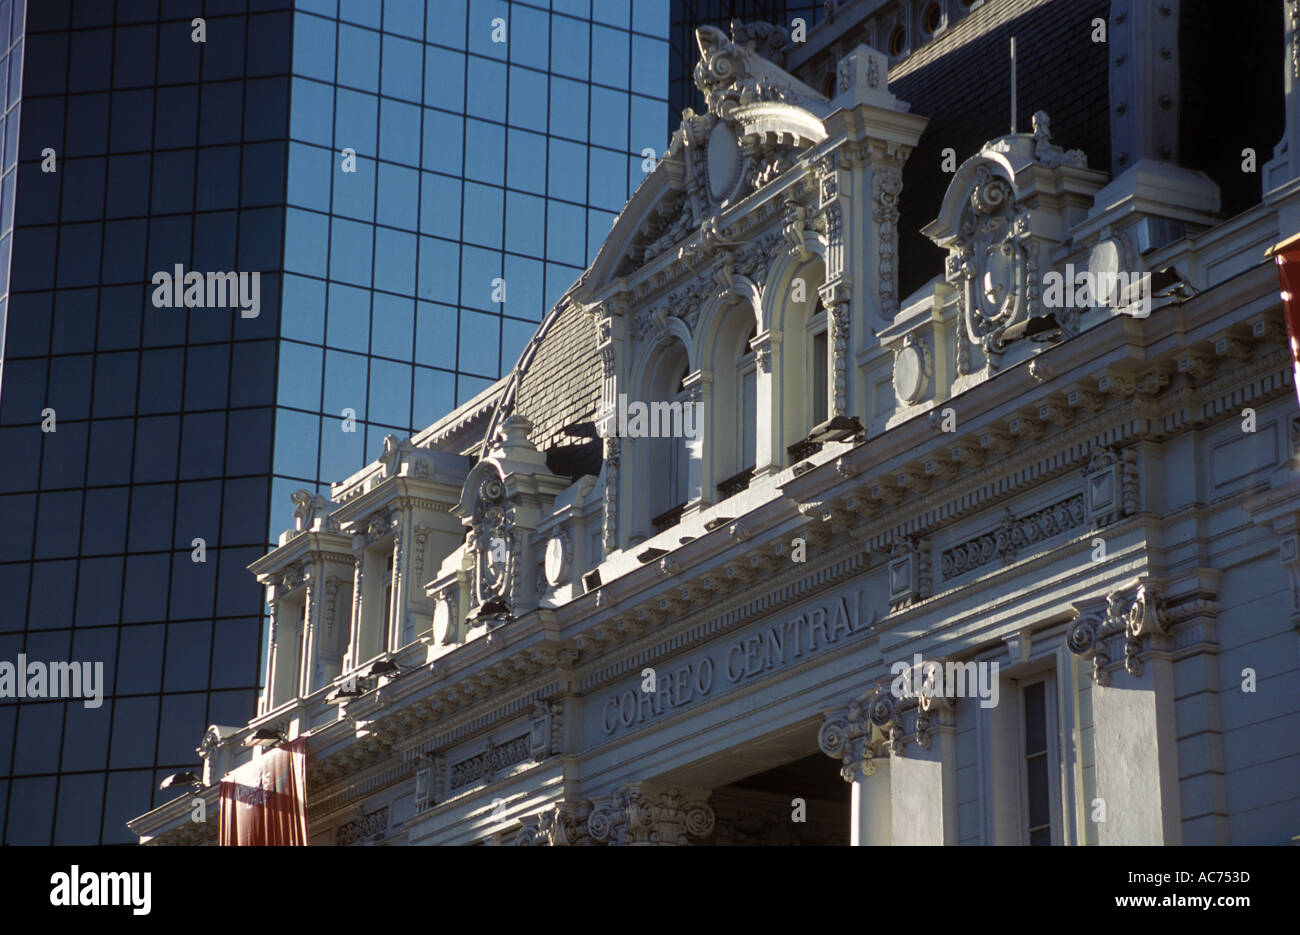 Historical Spanish Architecture of the CENTRAL POST OFFICE CORREO CENTRAL on the PLAZA DE ARMAS SANTIAGO CHILE Stock Photo